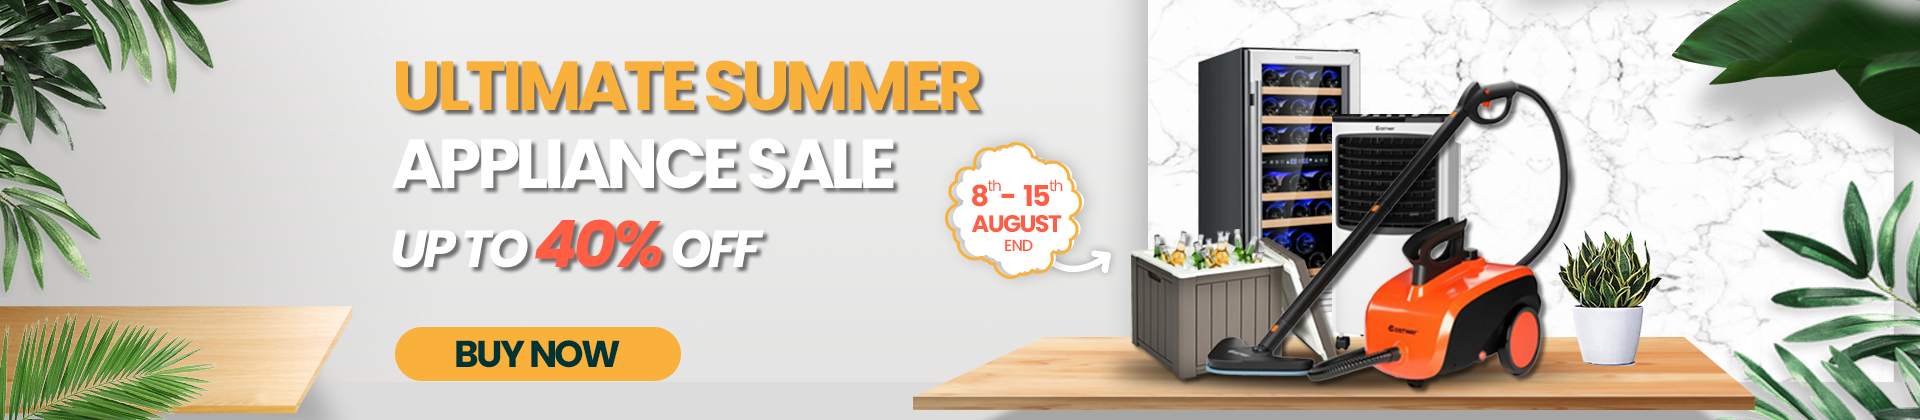 summer appliance sale,up tp 40%off,smart air conditioners